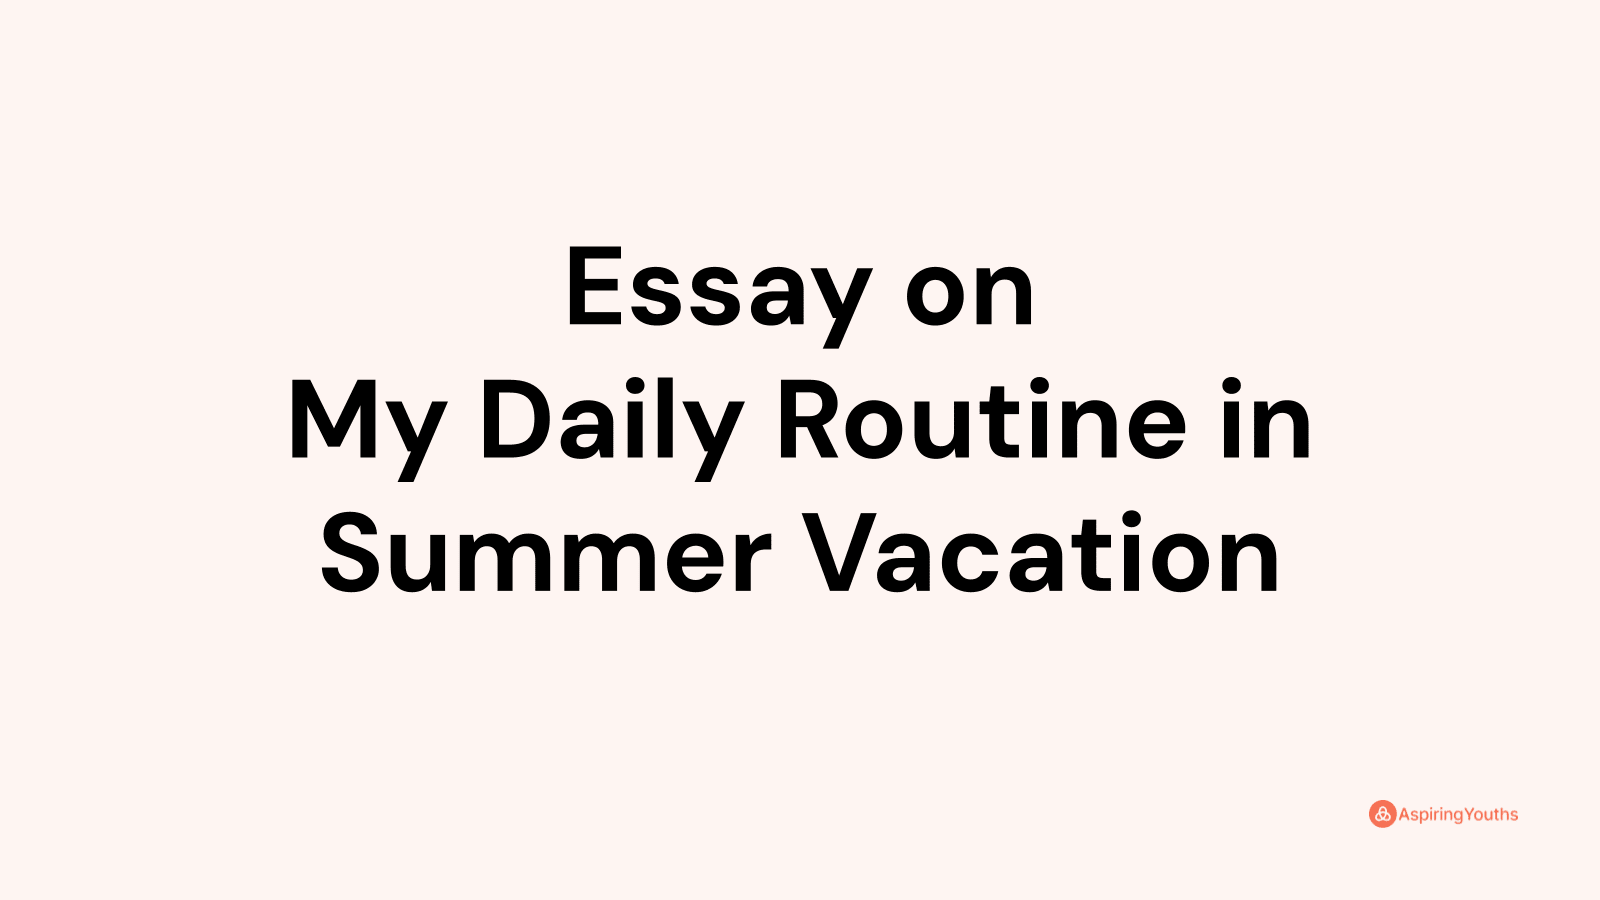 Essay on My Daily Routine in Summer Vacation